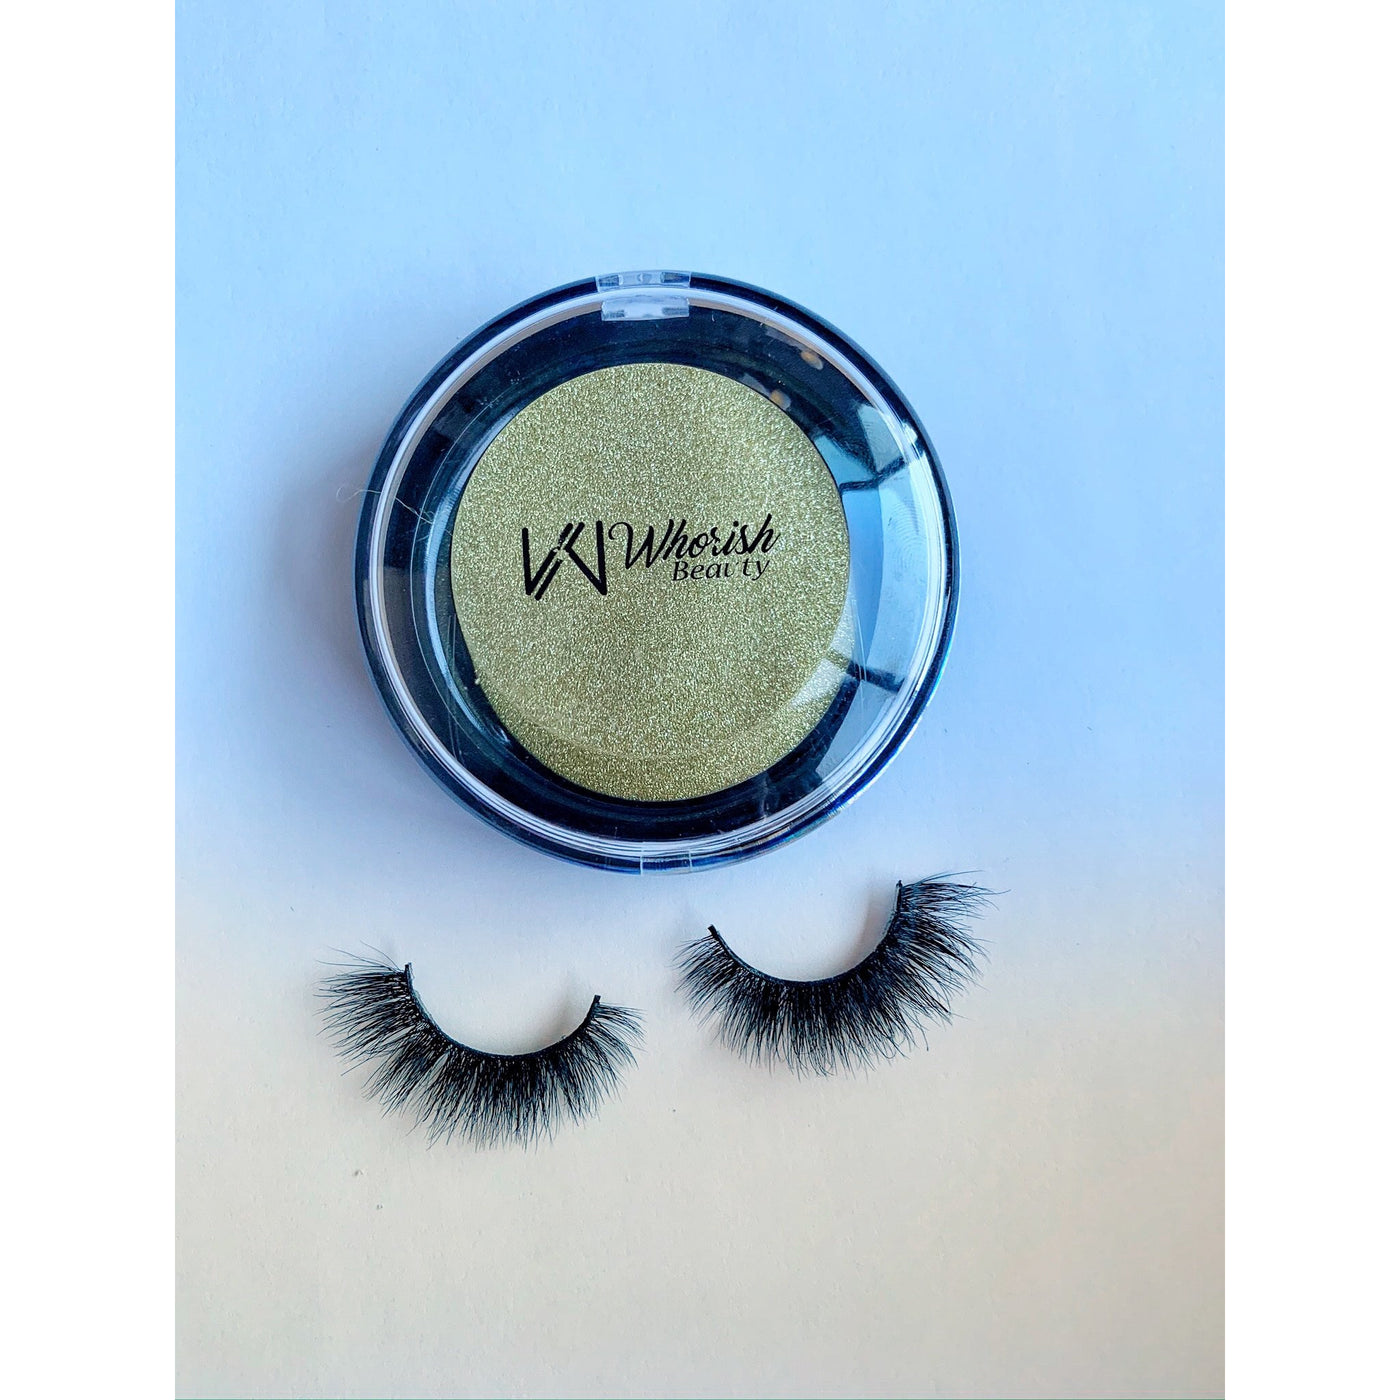 Whorish Beauty-Fass A$$ 3D Lashes - G'wan by Charon